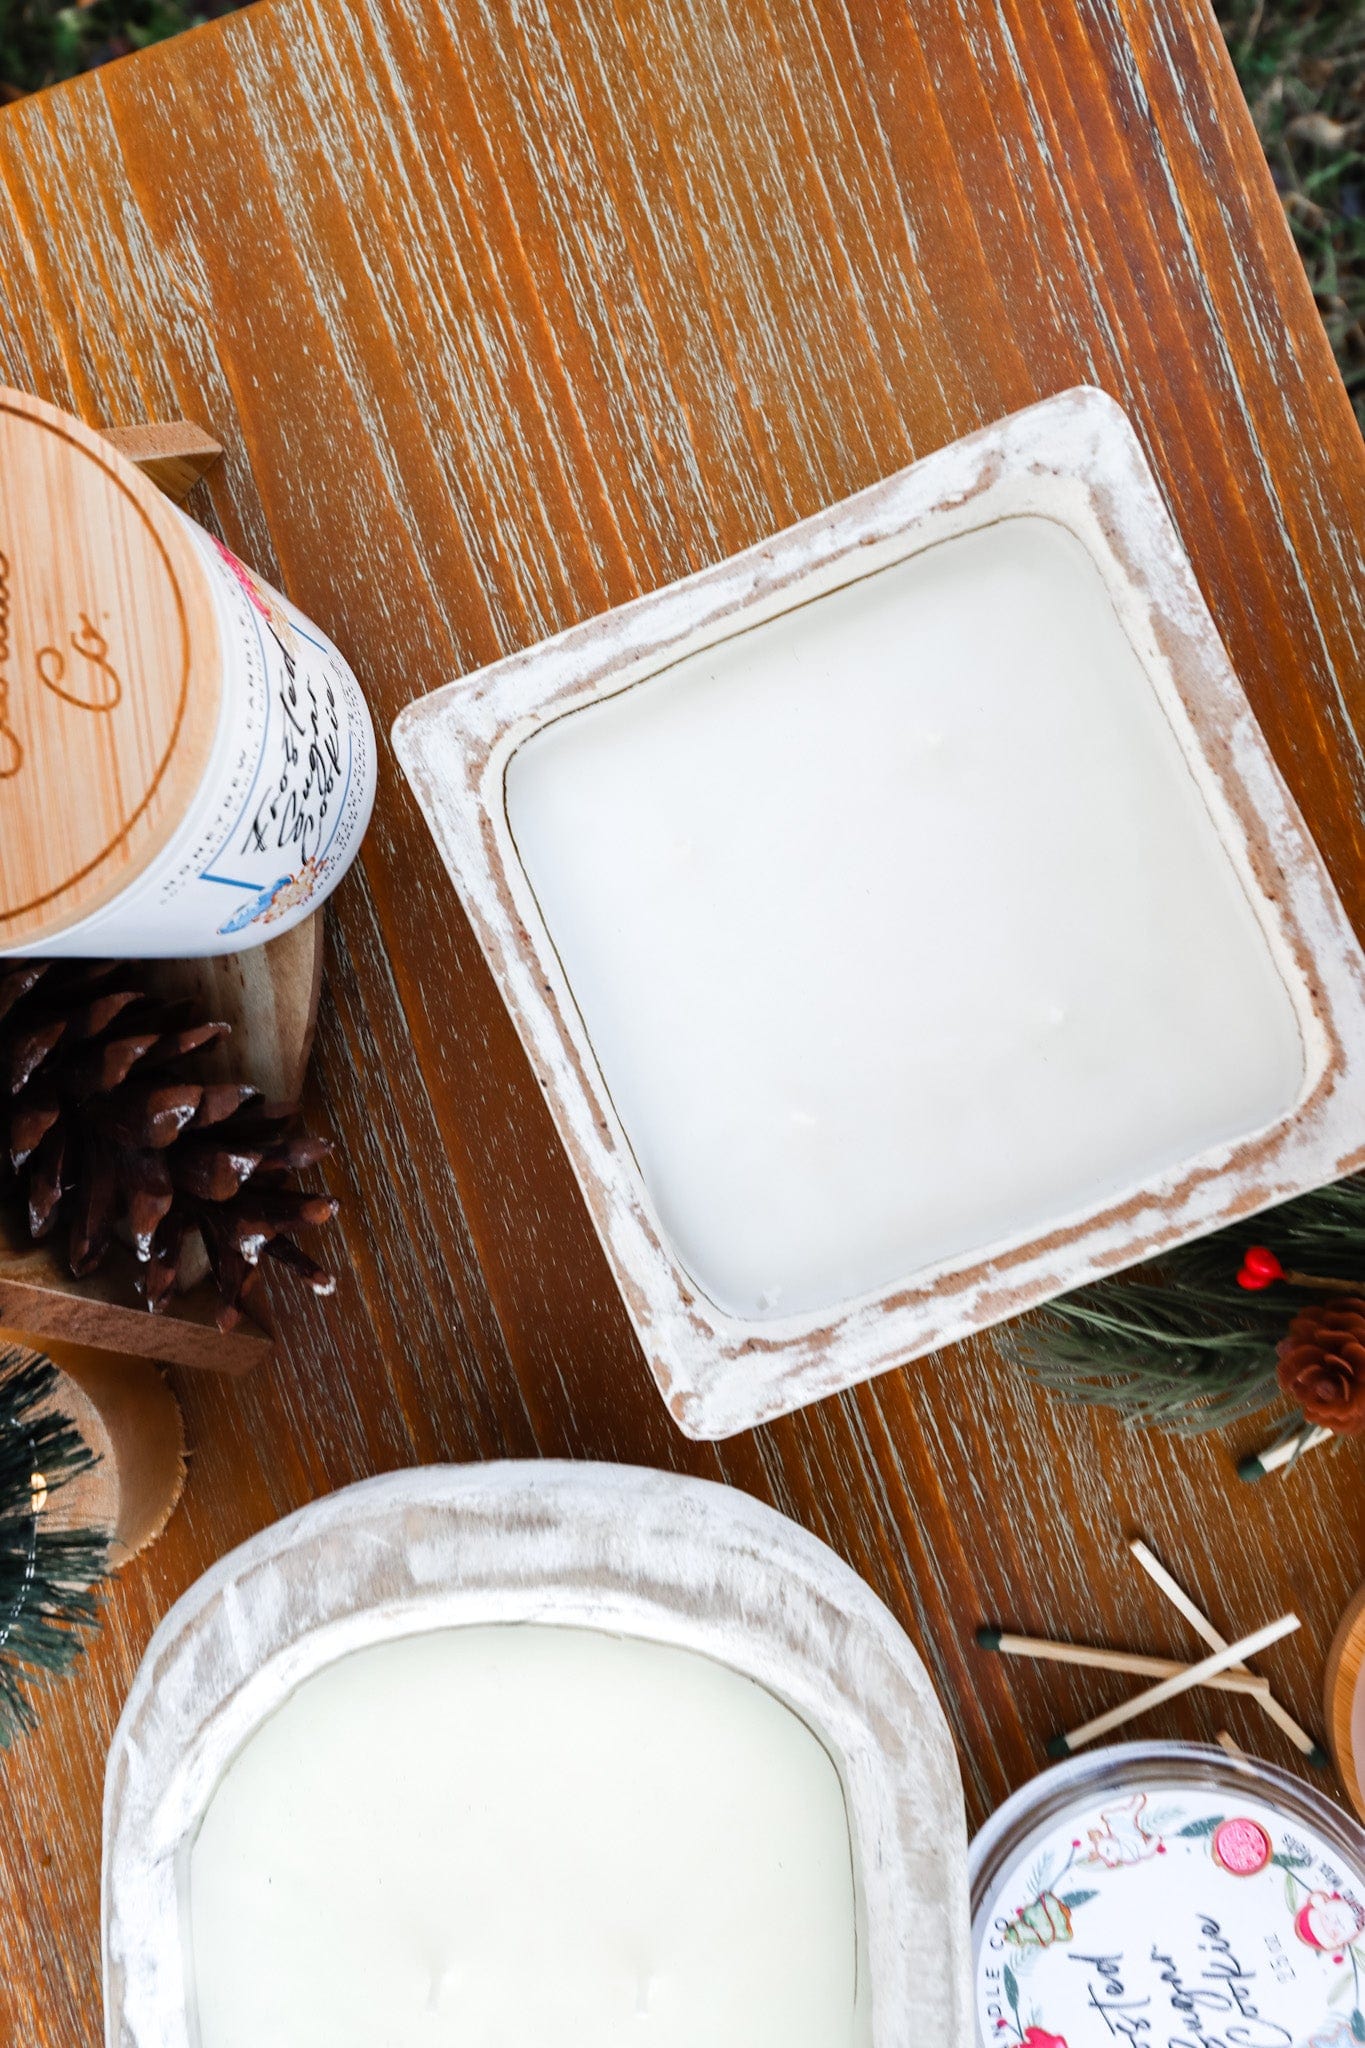 Square Clay Bowl Candle Holiday 2022